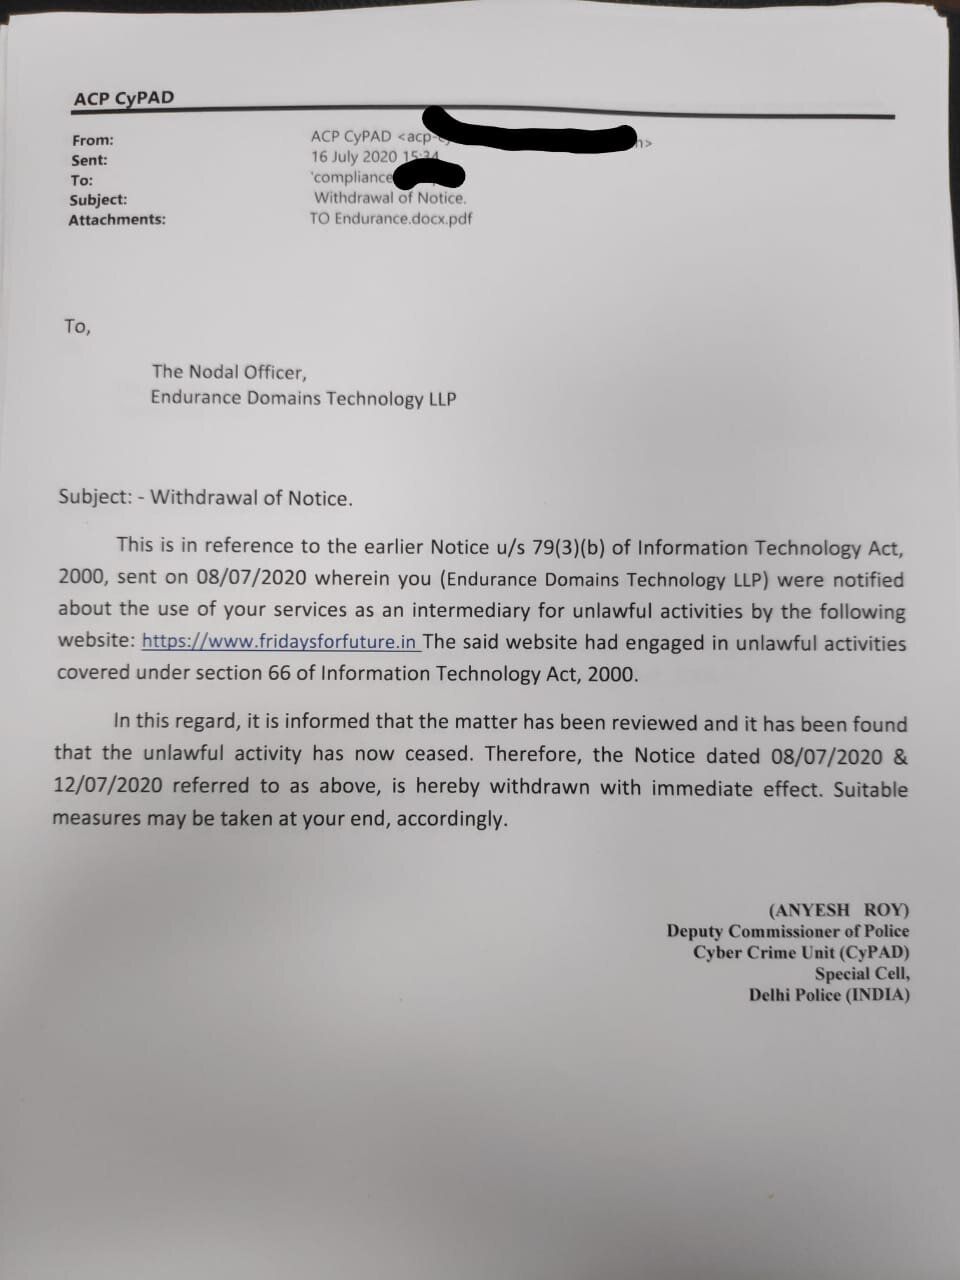 Copy of the email shared with HuffPost India by DCP Anyesh Roy mentioning that the two notices have been withdrawn on 16 July 2020. 